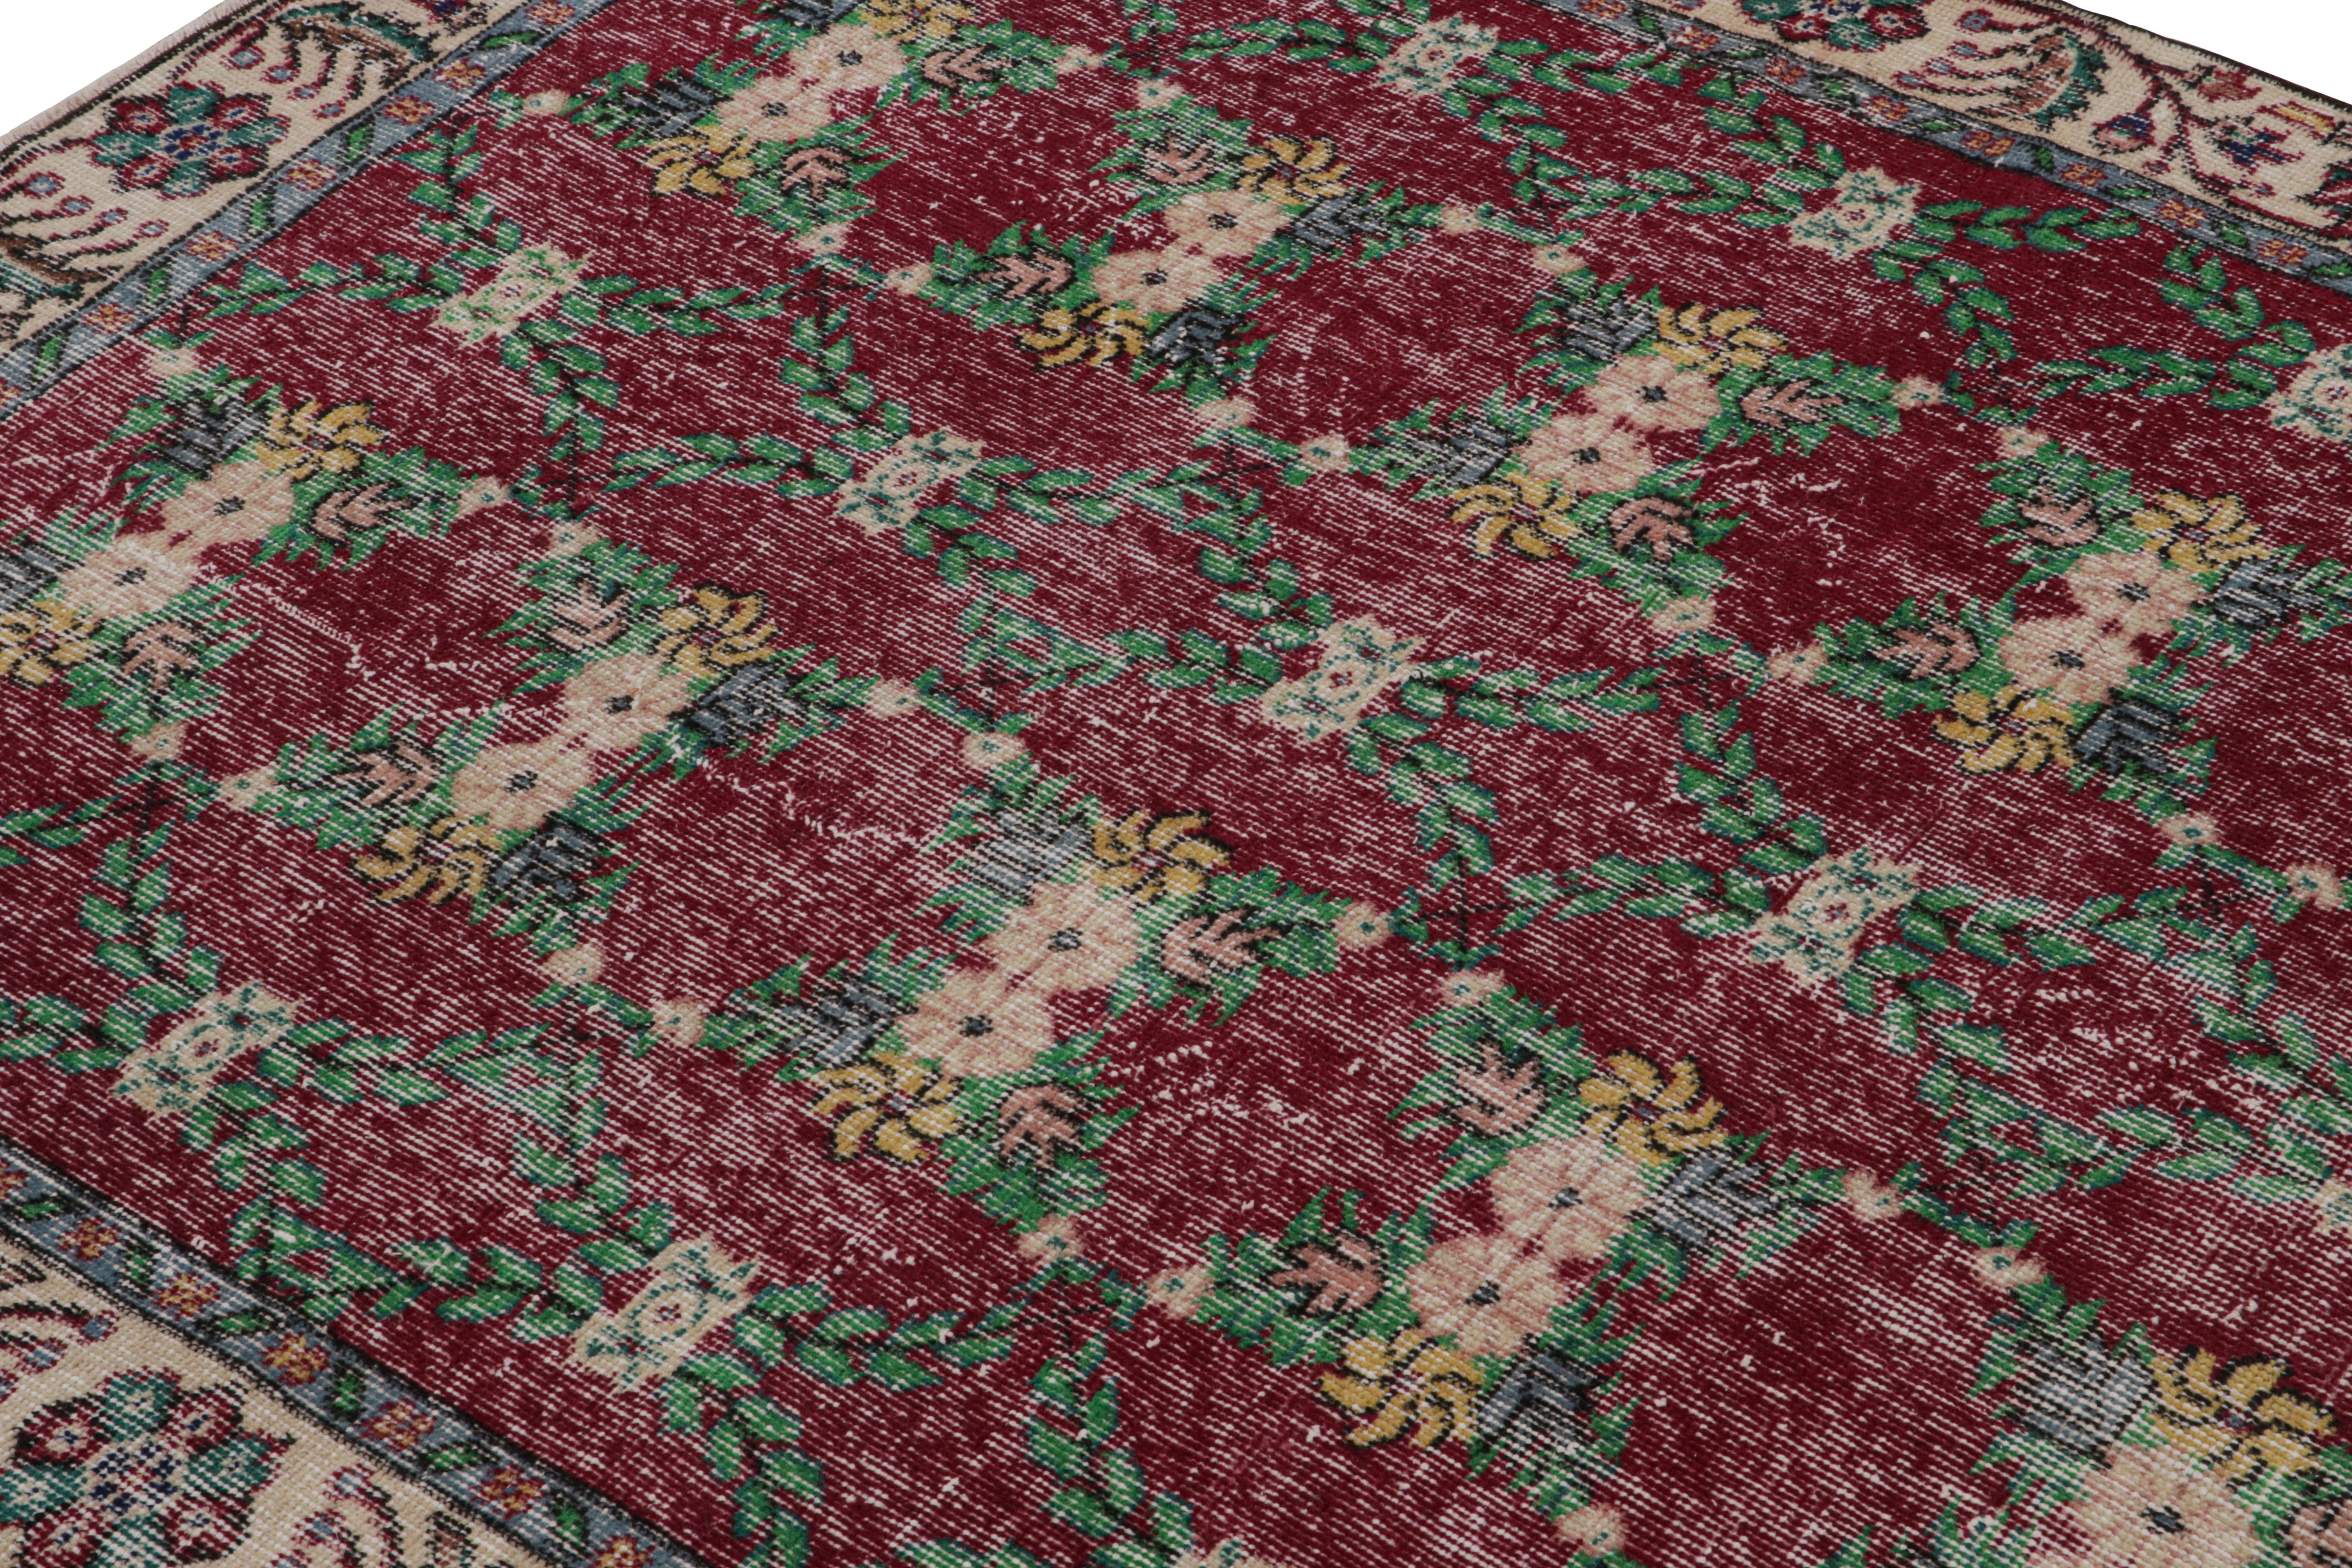 Vintage Zeki Müren Rug in Burgundy with Teal Floral Patterns, from Rug & Kilim In Good Condition For Sale In Long Island City, NY